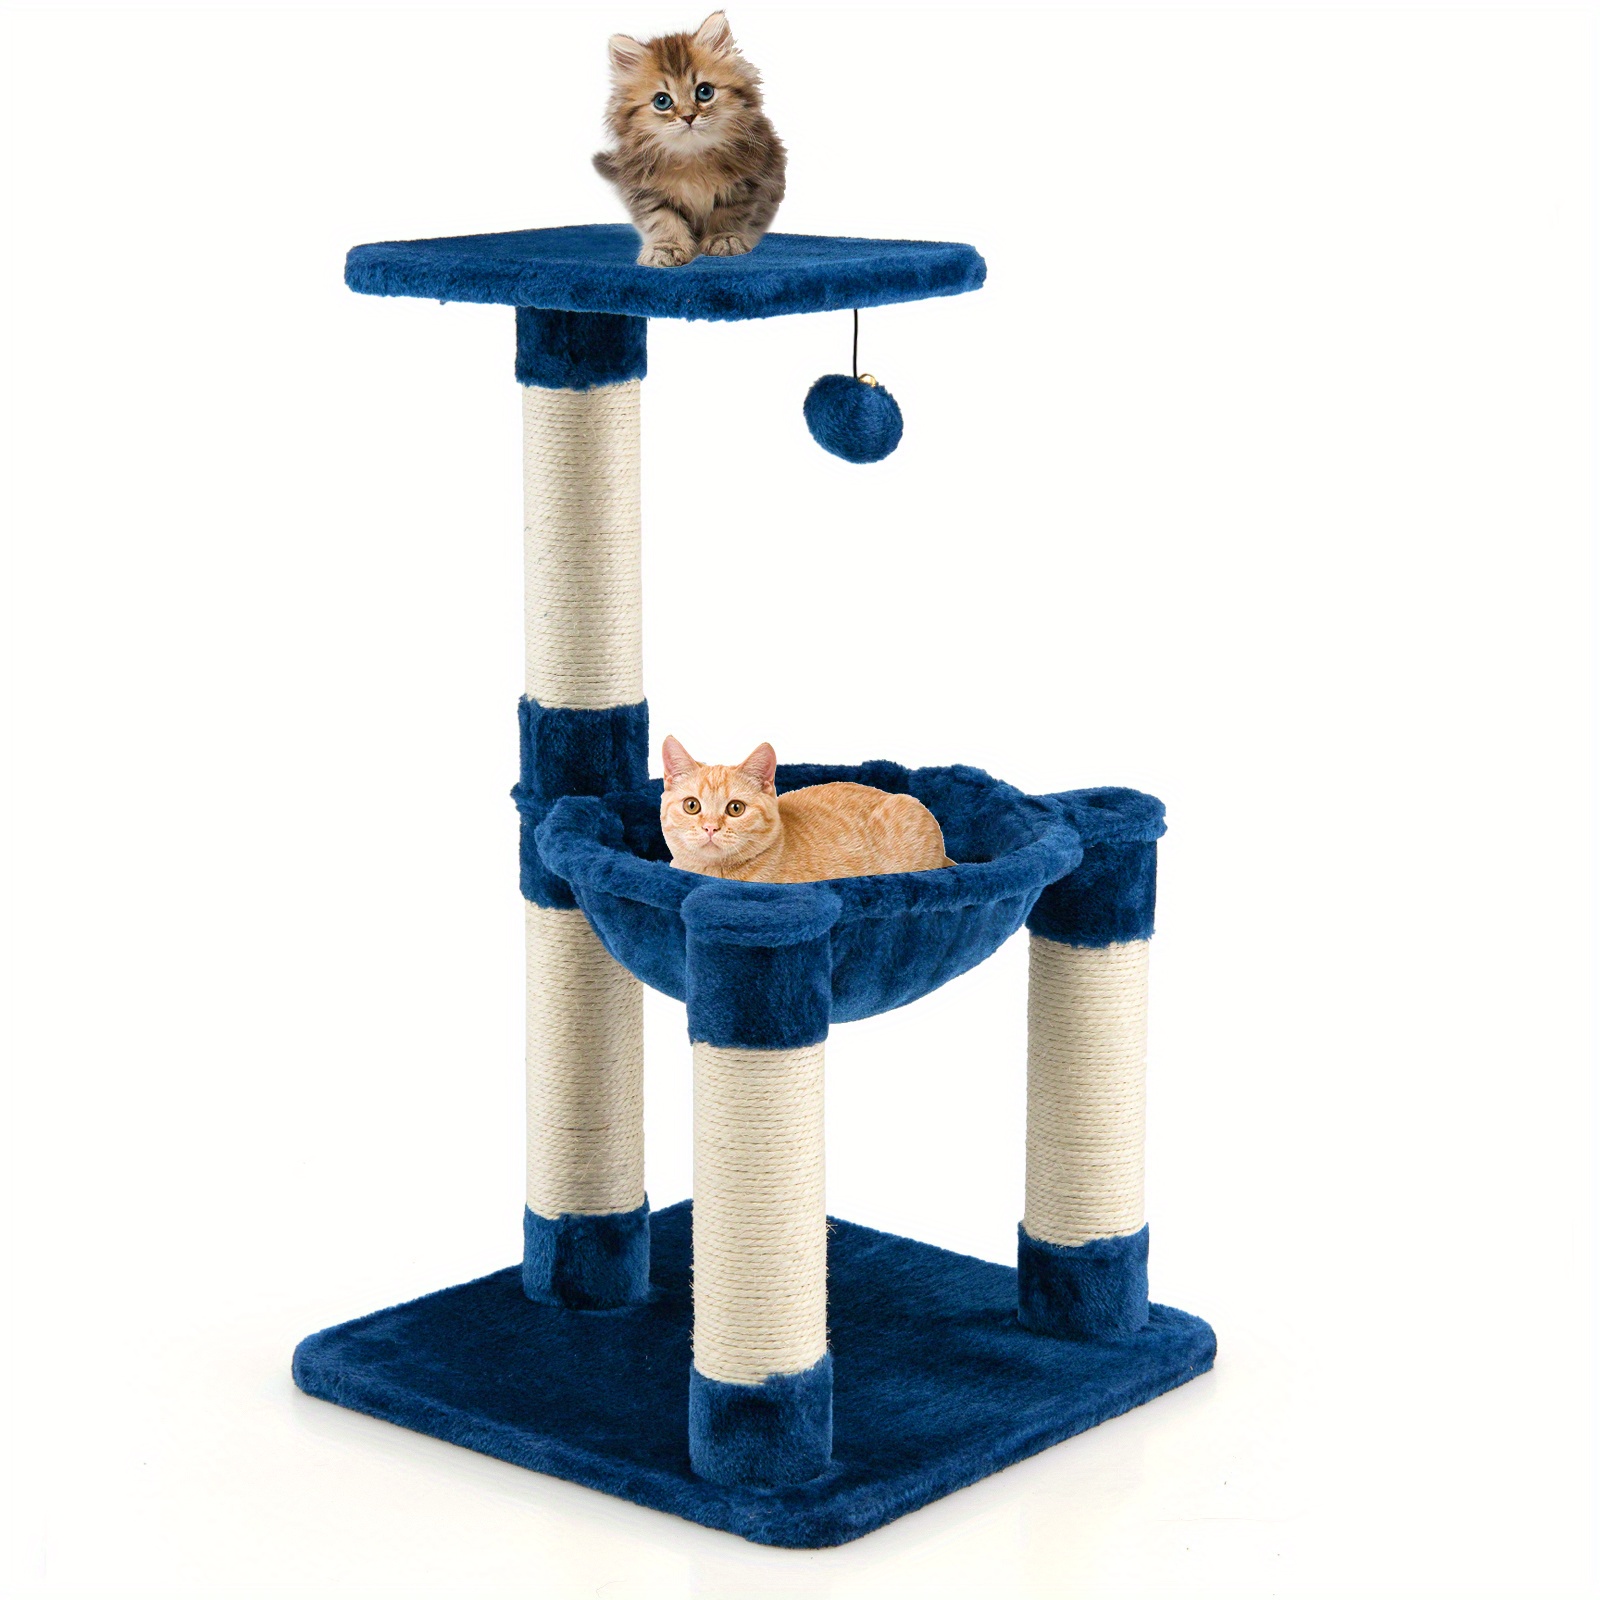 

Lifezeal Multi-level Cat Tree Tower With Scratching Posts, Plush Perches And Hammock, Sturdy Cat Activity Center, Blue, Playful Ball Included, Ideal For Kittens And Small Cats